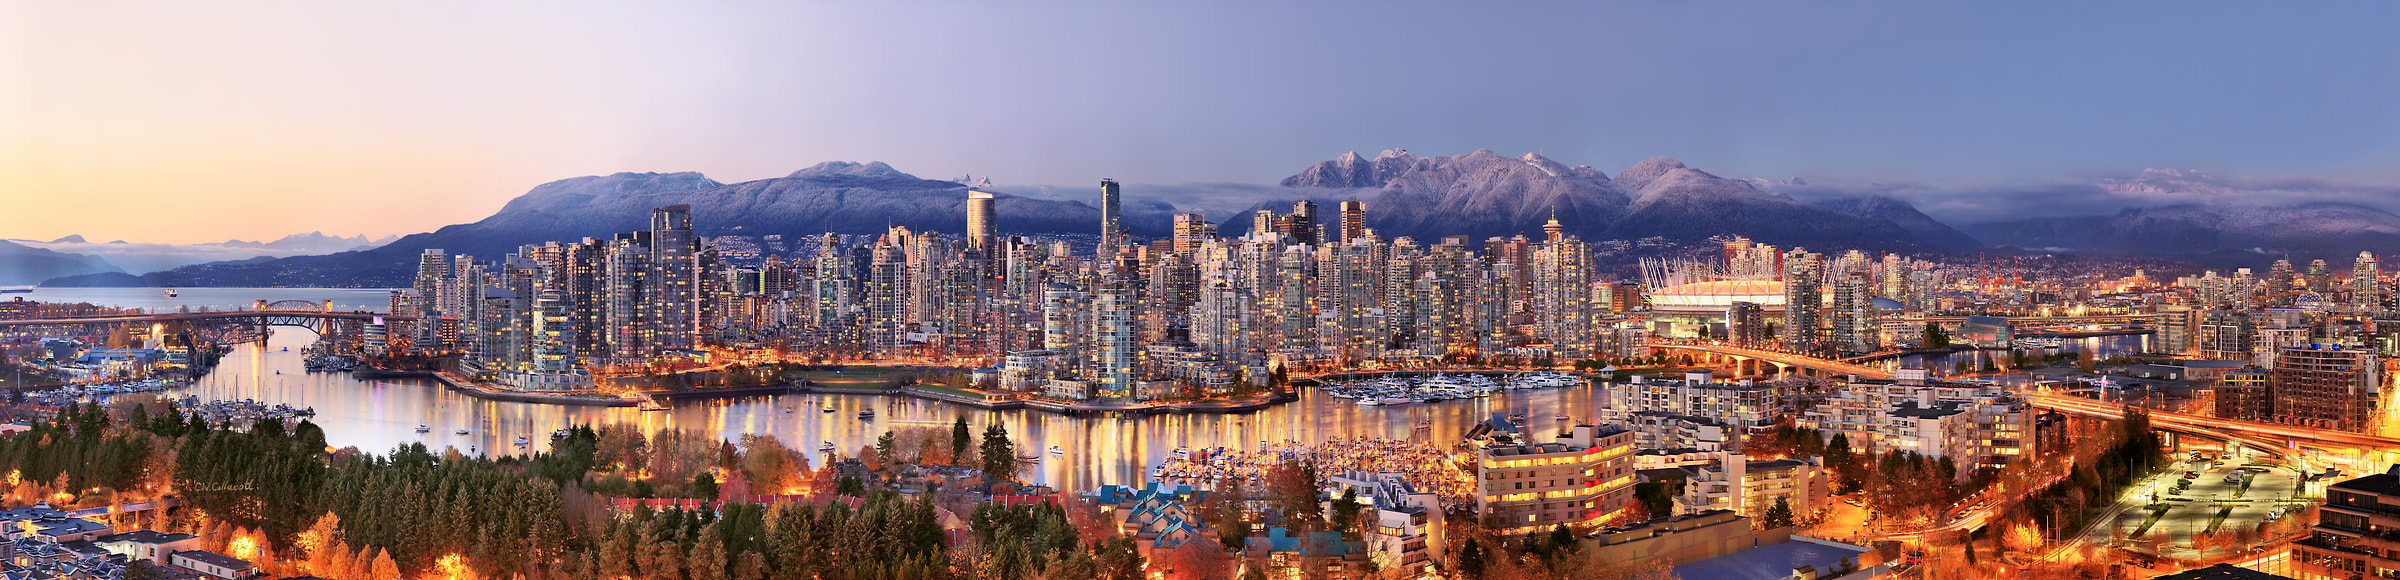 959 megapixels! A very high resolution, large-format VAST photo print of the Vancouver skyline; photograph created by Chris Collacott in Vancouver, British Columbia, Canada.